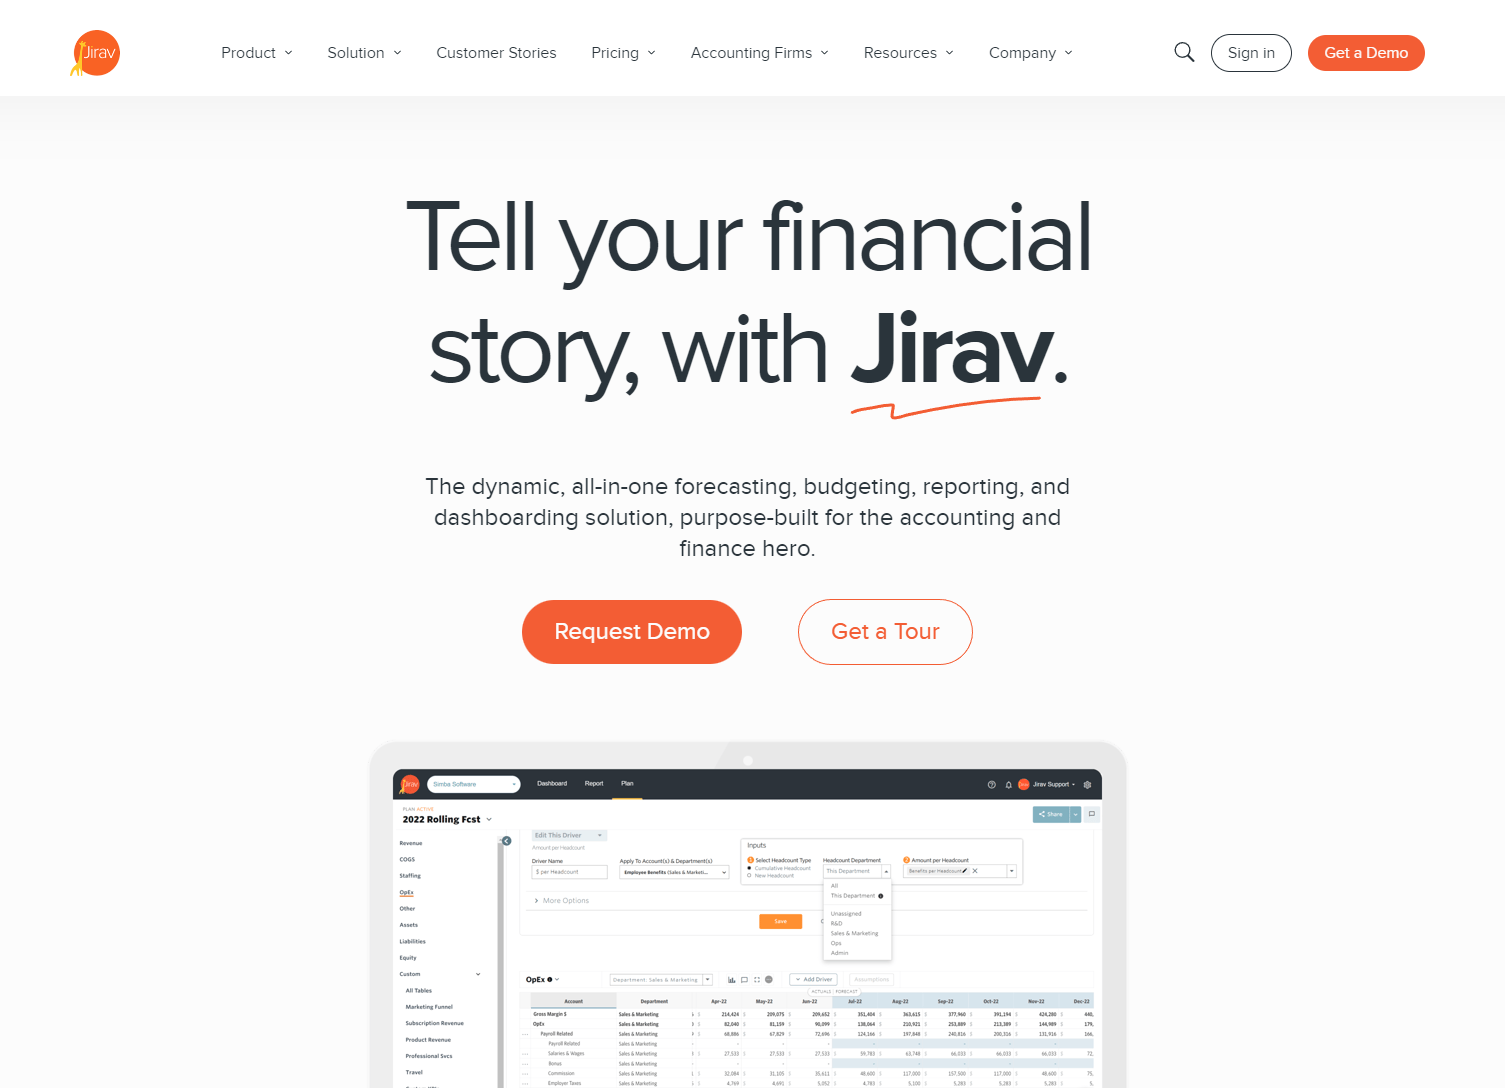 Image alt : Jirav is a forecasting, budgeting, and financial model solution.